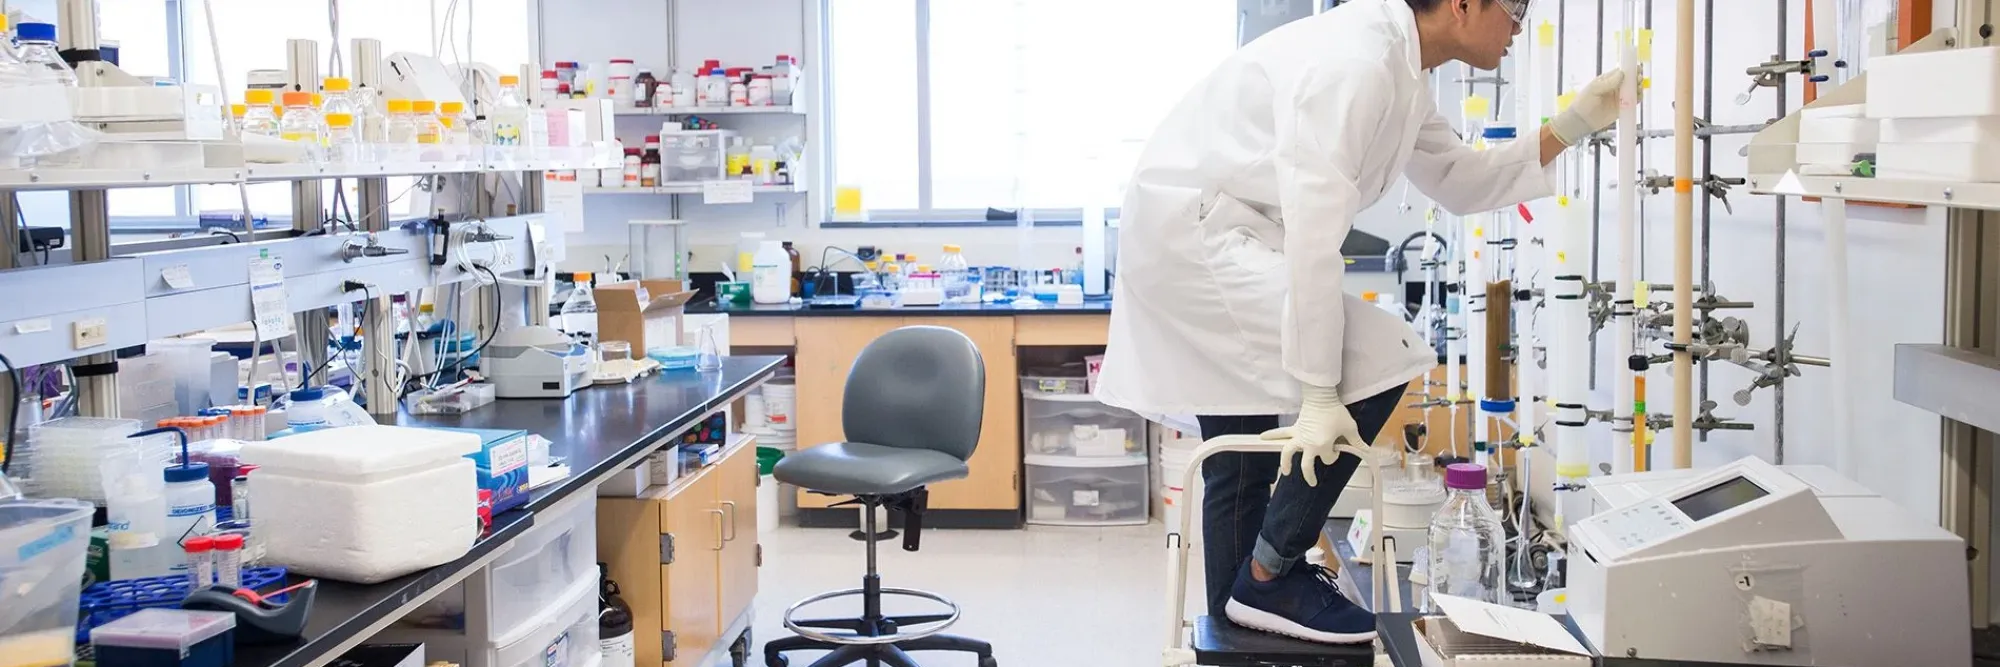 Person in a lab environment wearing safety gear